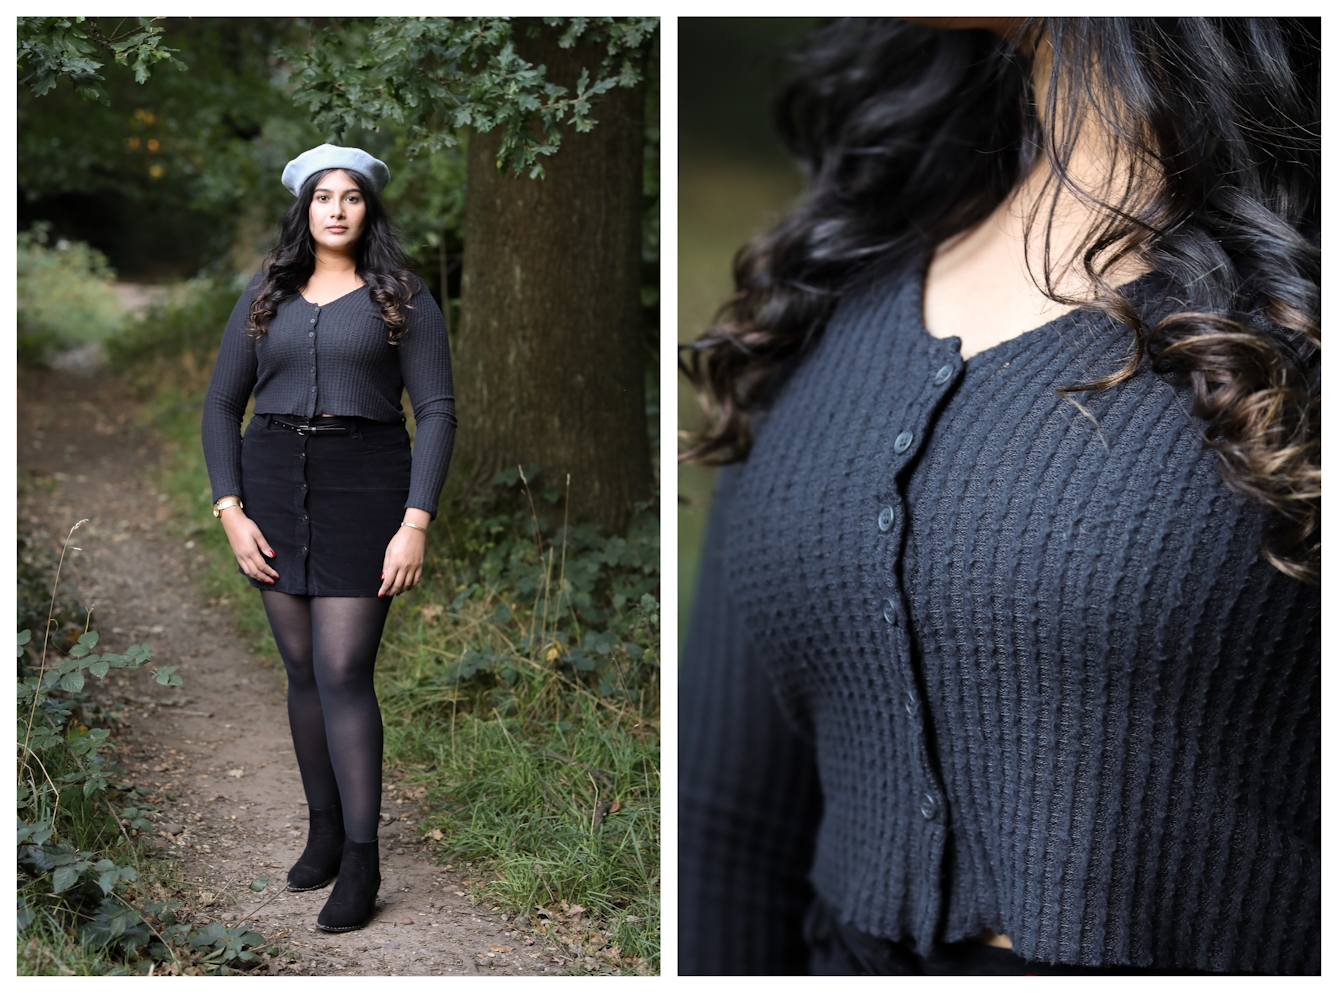 Photographic diptych. The image on the left shows a full length view of a woman who is wearing dark blue knitted top with buttons down the front, a thy length black skirt, dark tights and light blue beret. She is standing looking straight at the camera, with her hands by her side, left foot slightly in front of the other. In the background can be seen a dark park or woodland scene with a footpath disappearing into the distance. On either side of the path is green vegetation and tree trunks. The image on the right shows a close-up of the same woman in the same dress, concentrating on her torso which is slightly angled to the camera.